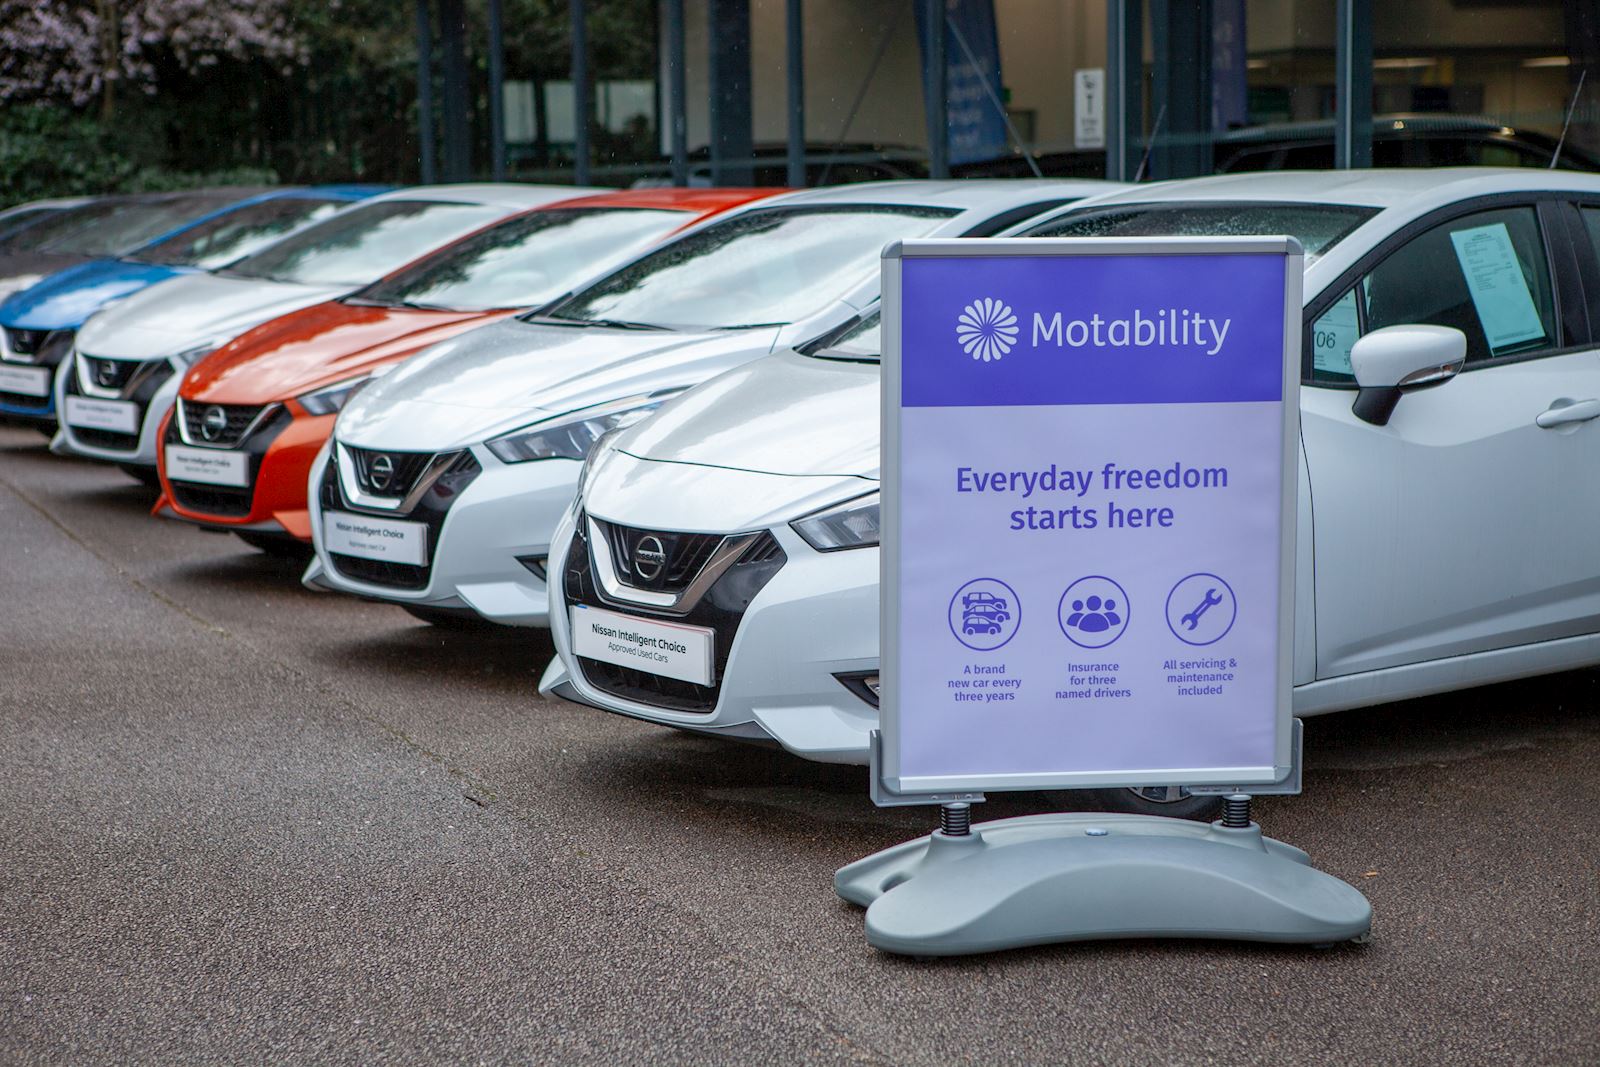 Cars outside a dealership, with a Motability Scheme sign